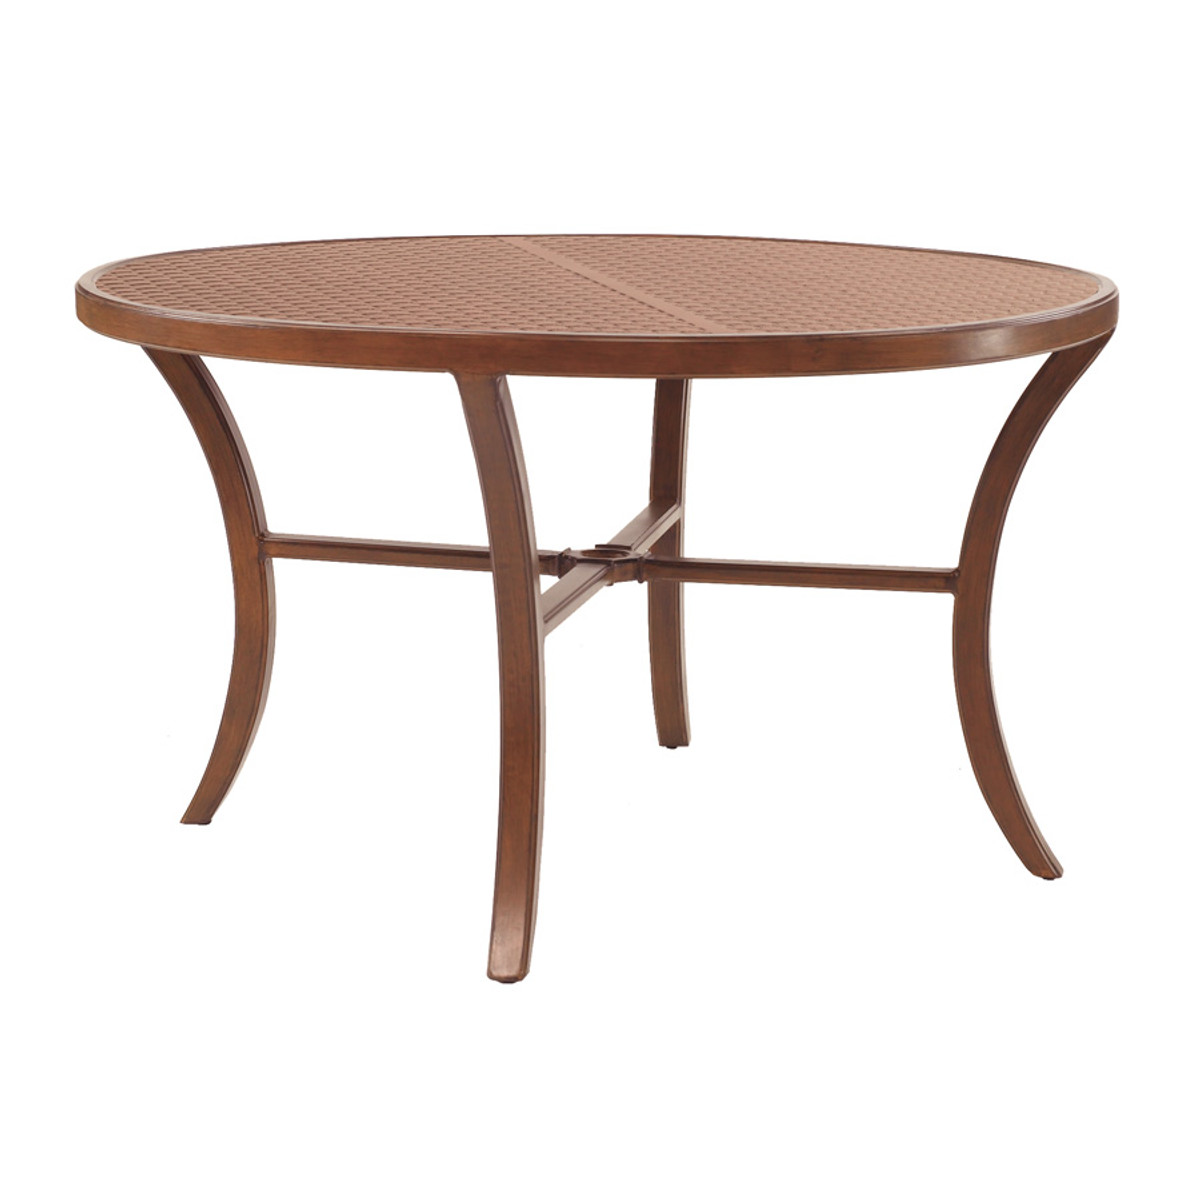 49″ CLASSICAL ROUND DINING TABLE